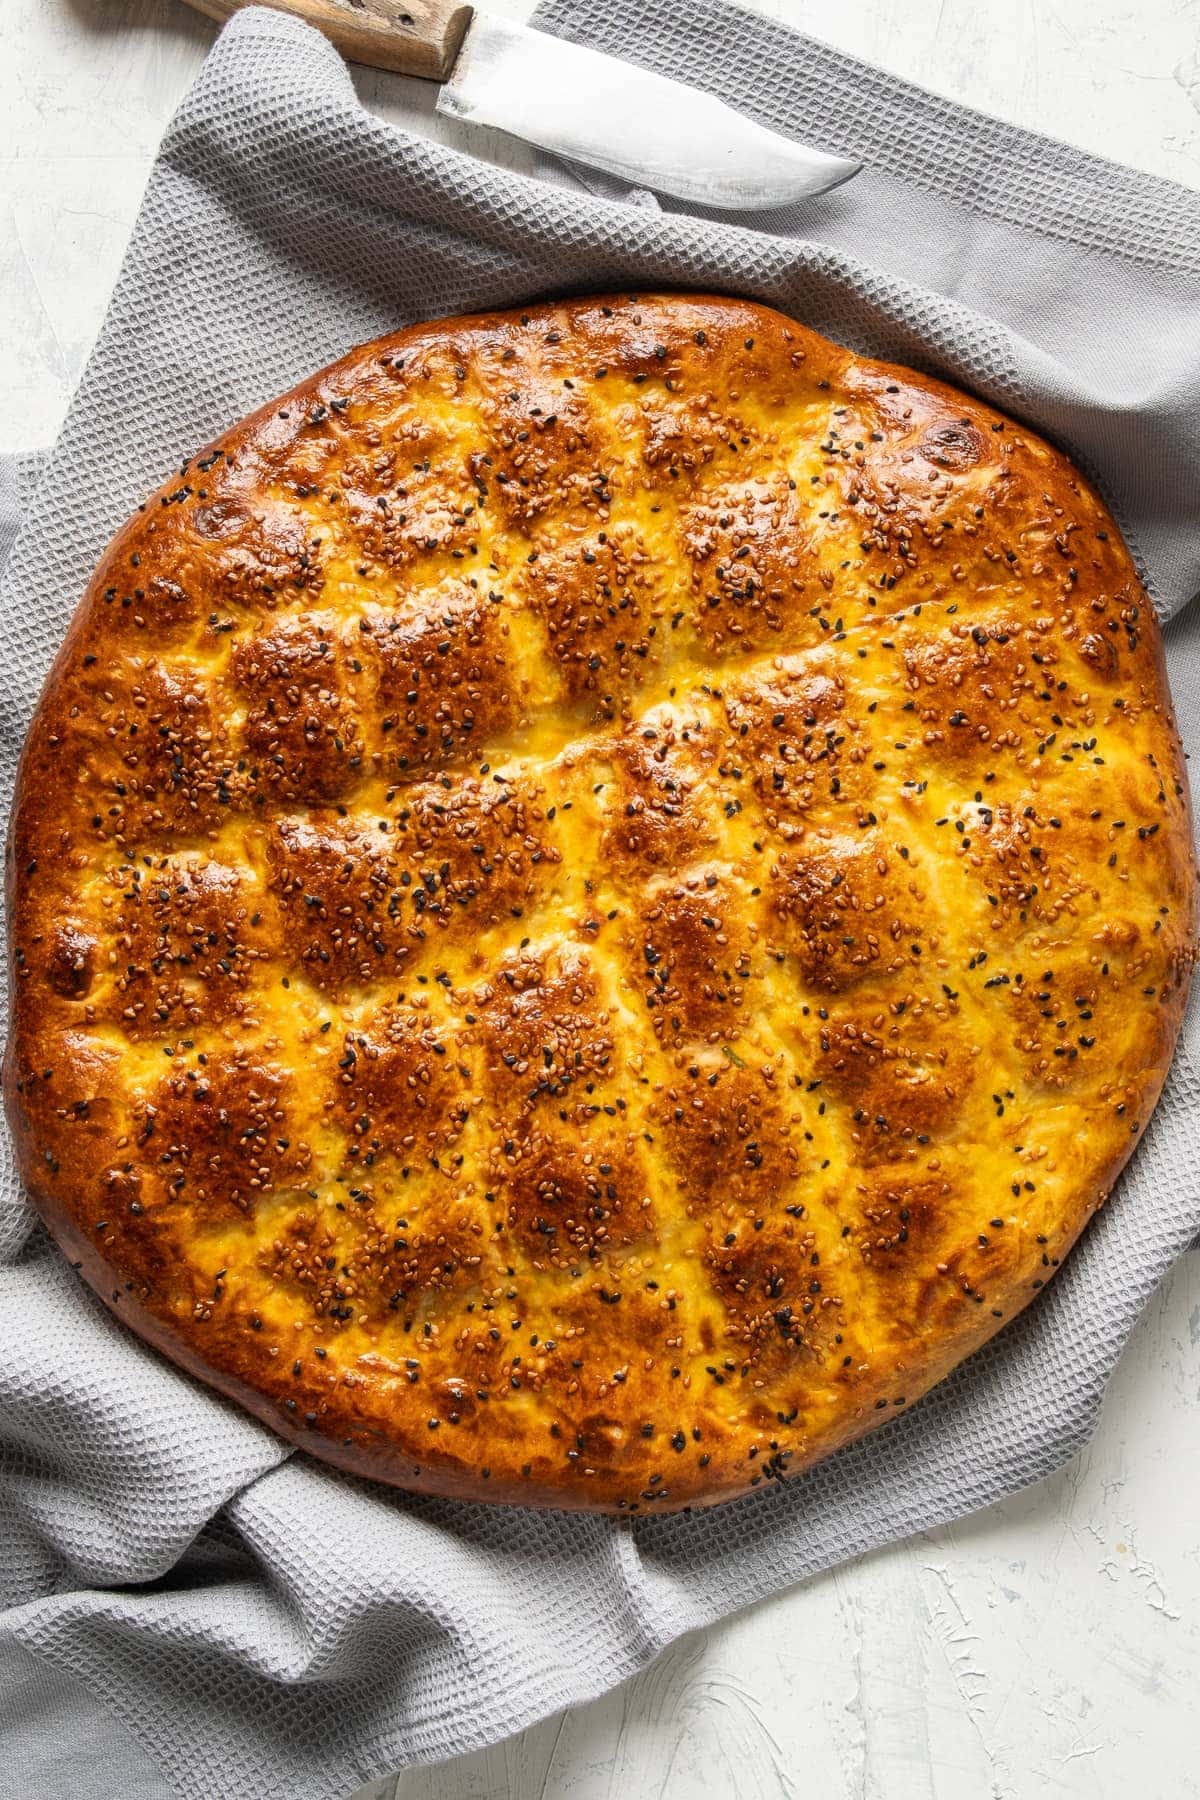 Newly baked pide bread with sesame seeds on a grey kitchen towel.